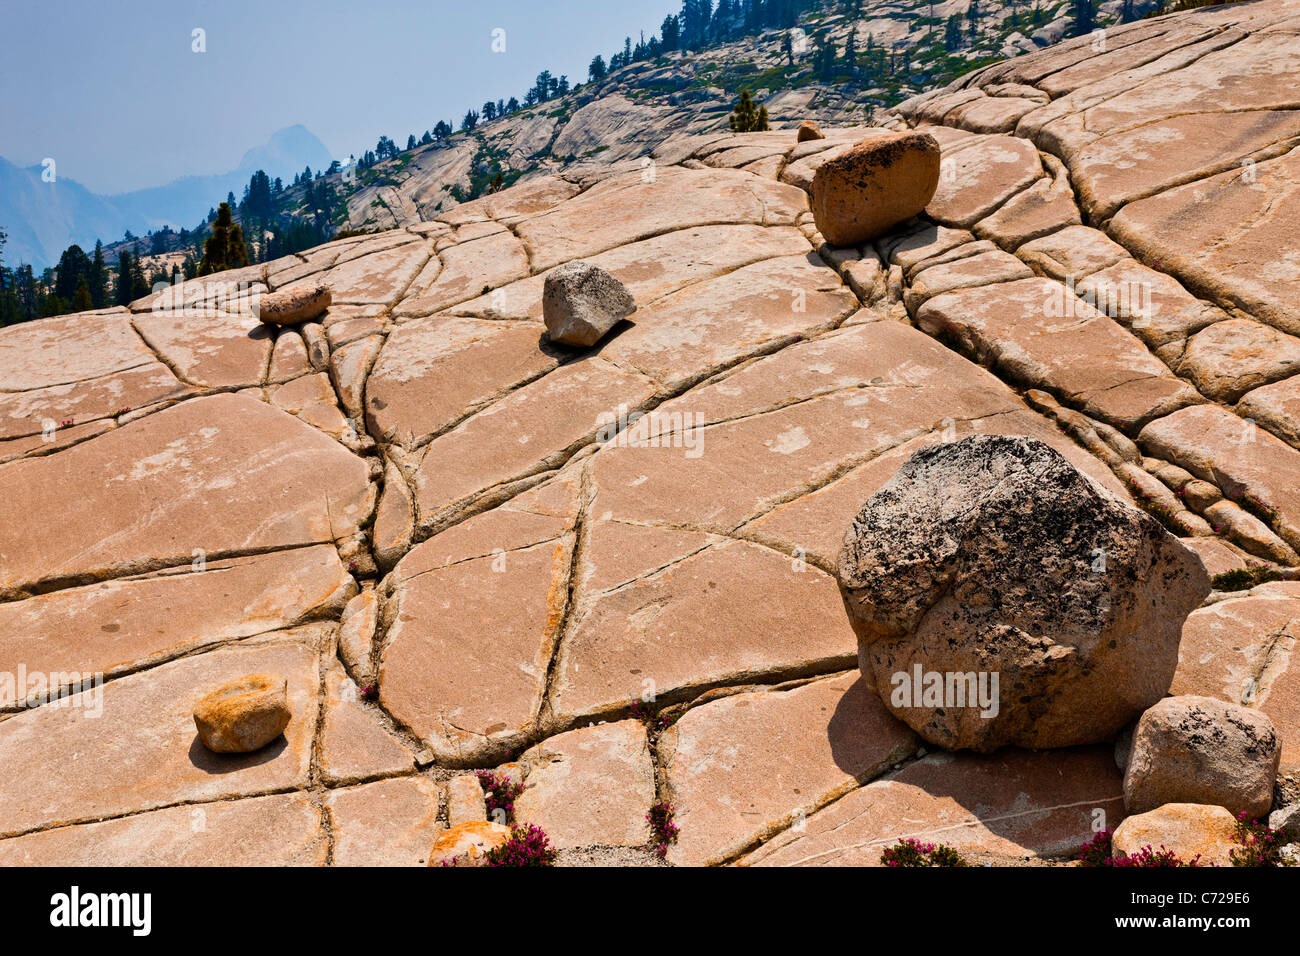 Glaciated mountainside with boulders and grykes, with Half Dome in the distance. Tioga Road, Yosemite National Park. JMH5286 Stock Photo